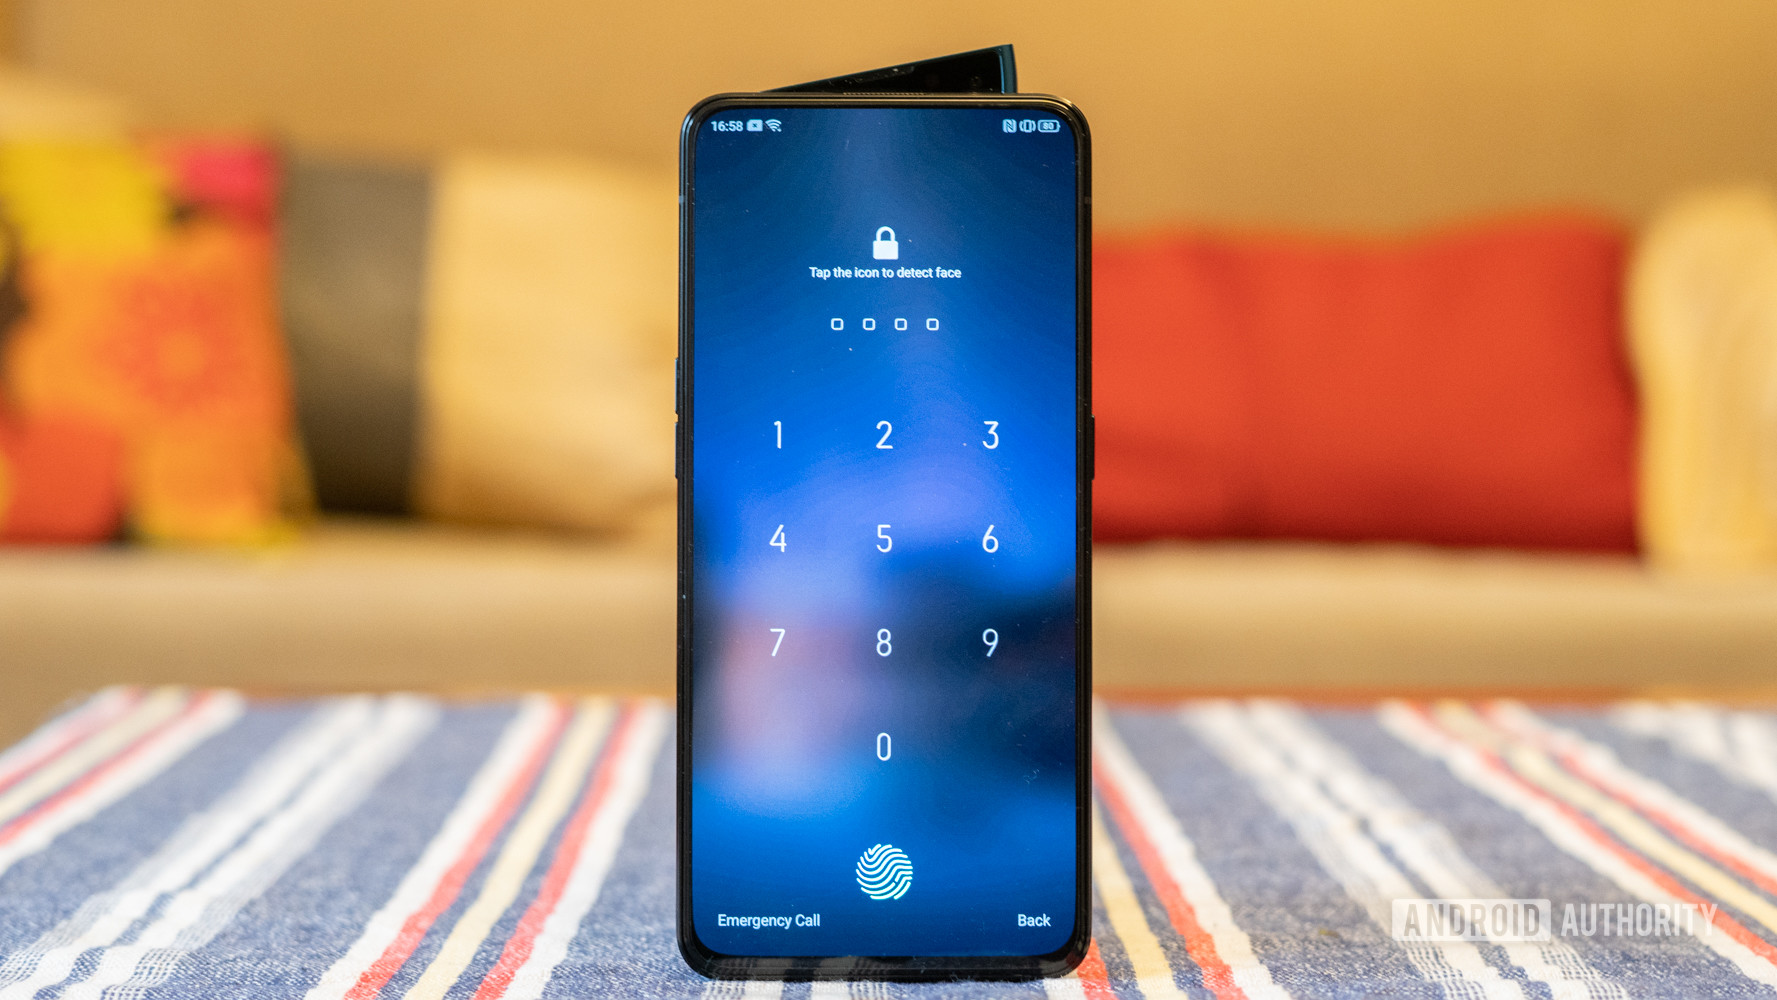 Oppo Reno 2 front display and shark fin